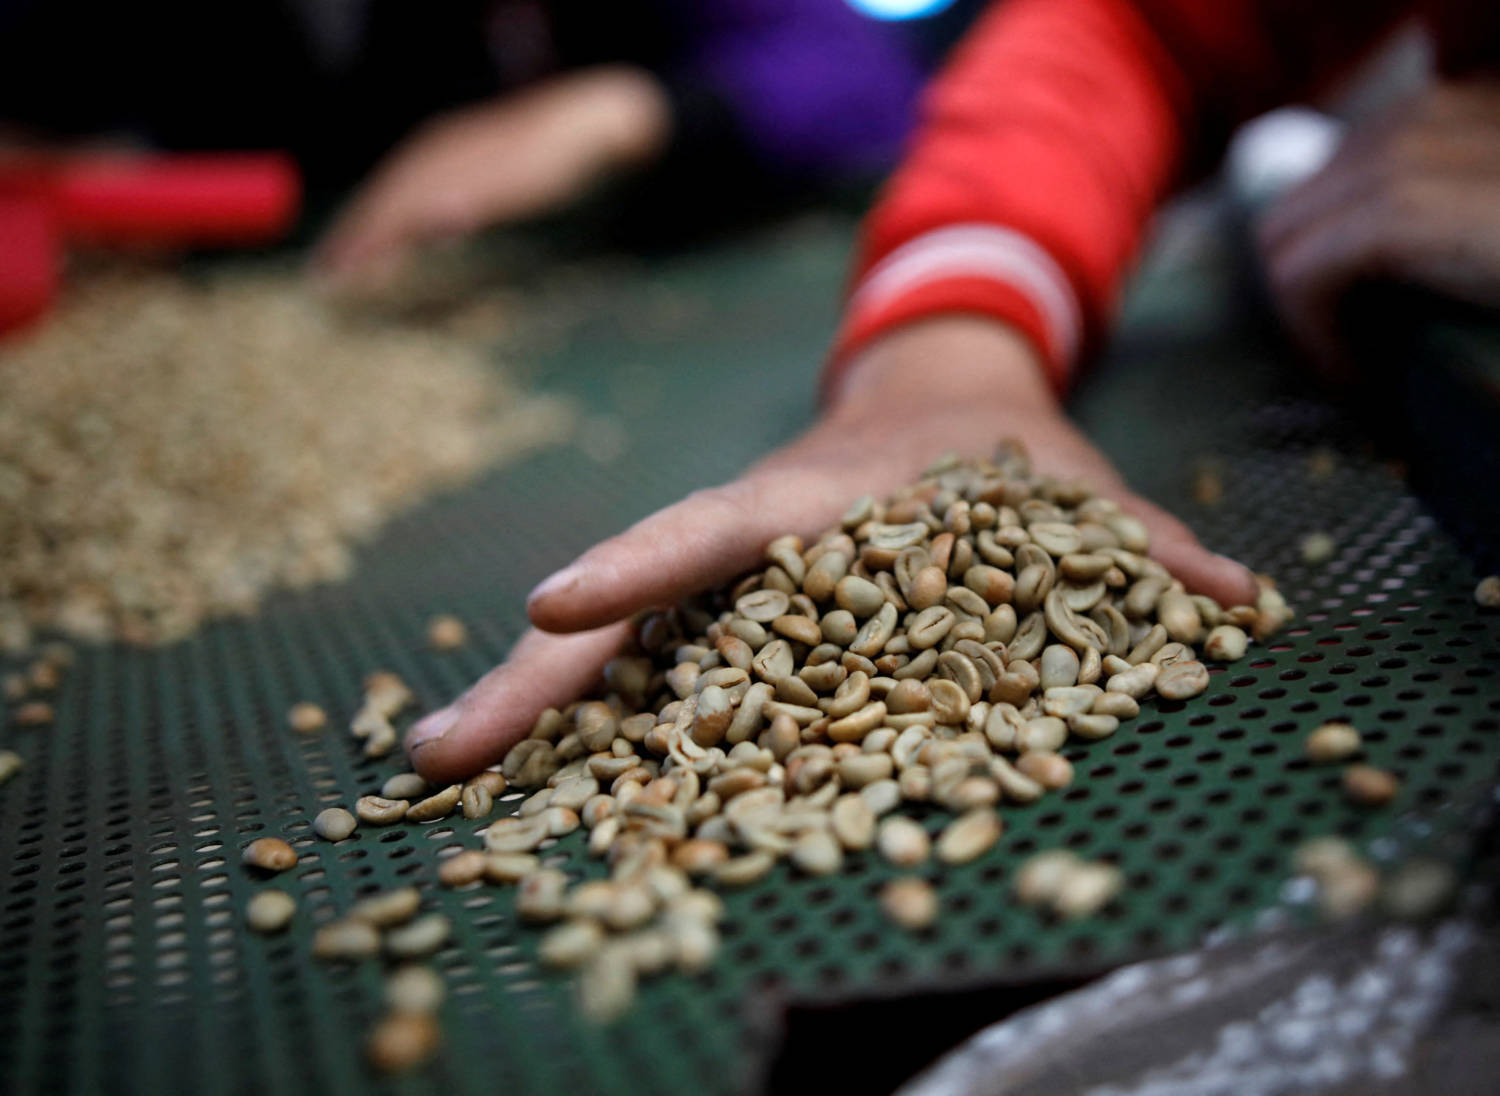 File Photo: Workers Sort Arabica Green Coffee Beans At A Coffee Mill In Pangalengan, West Java